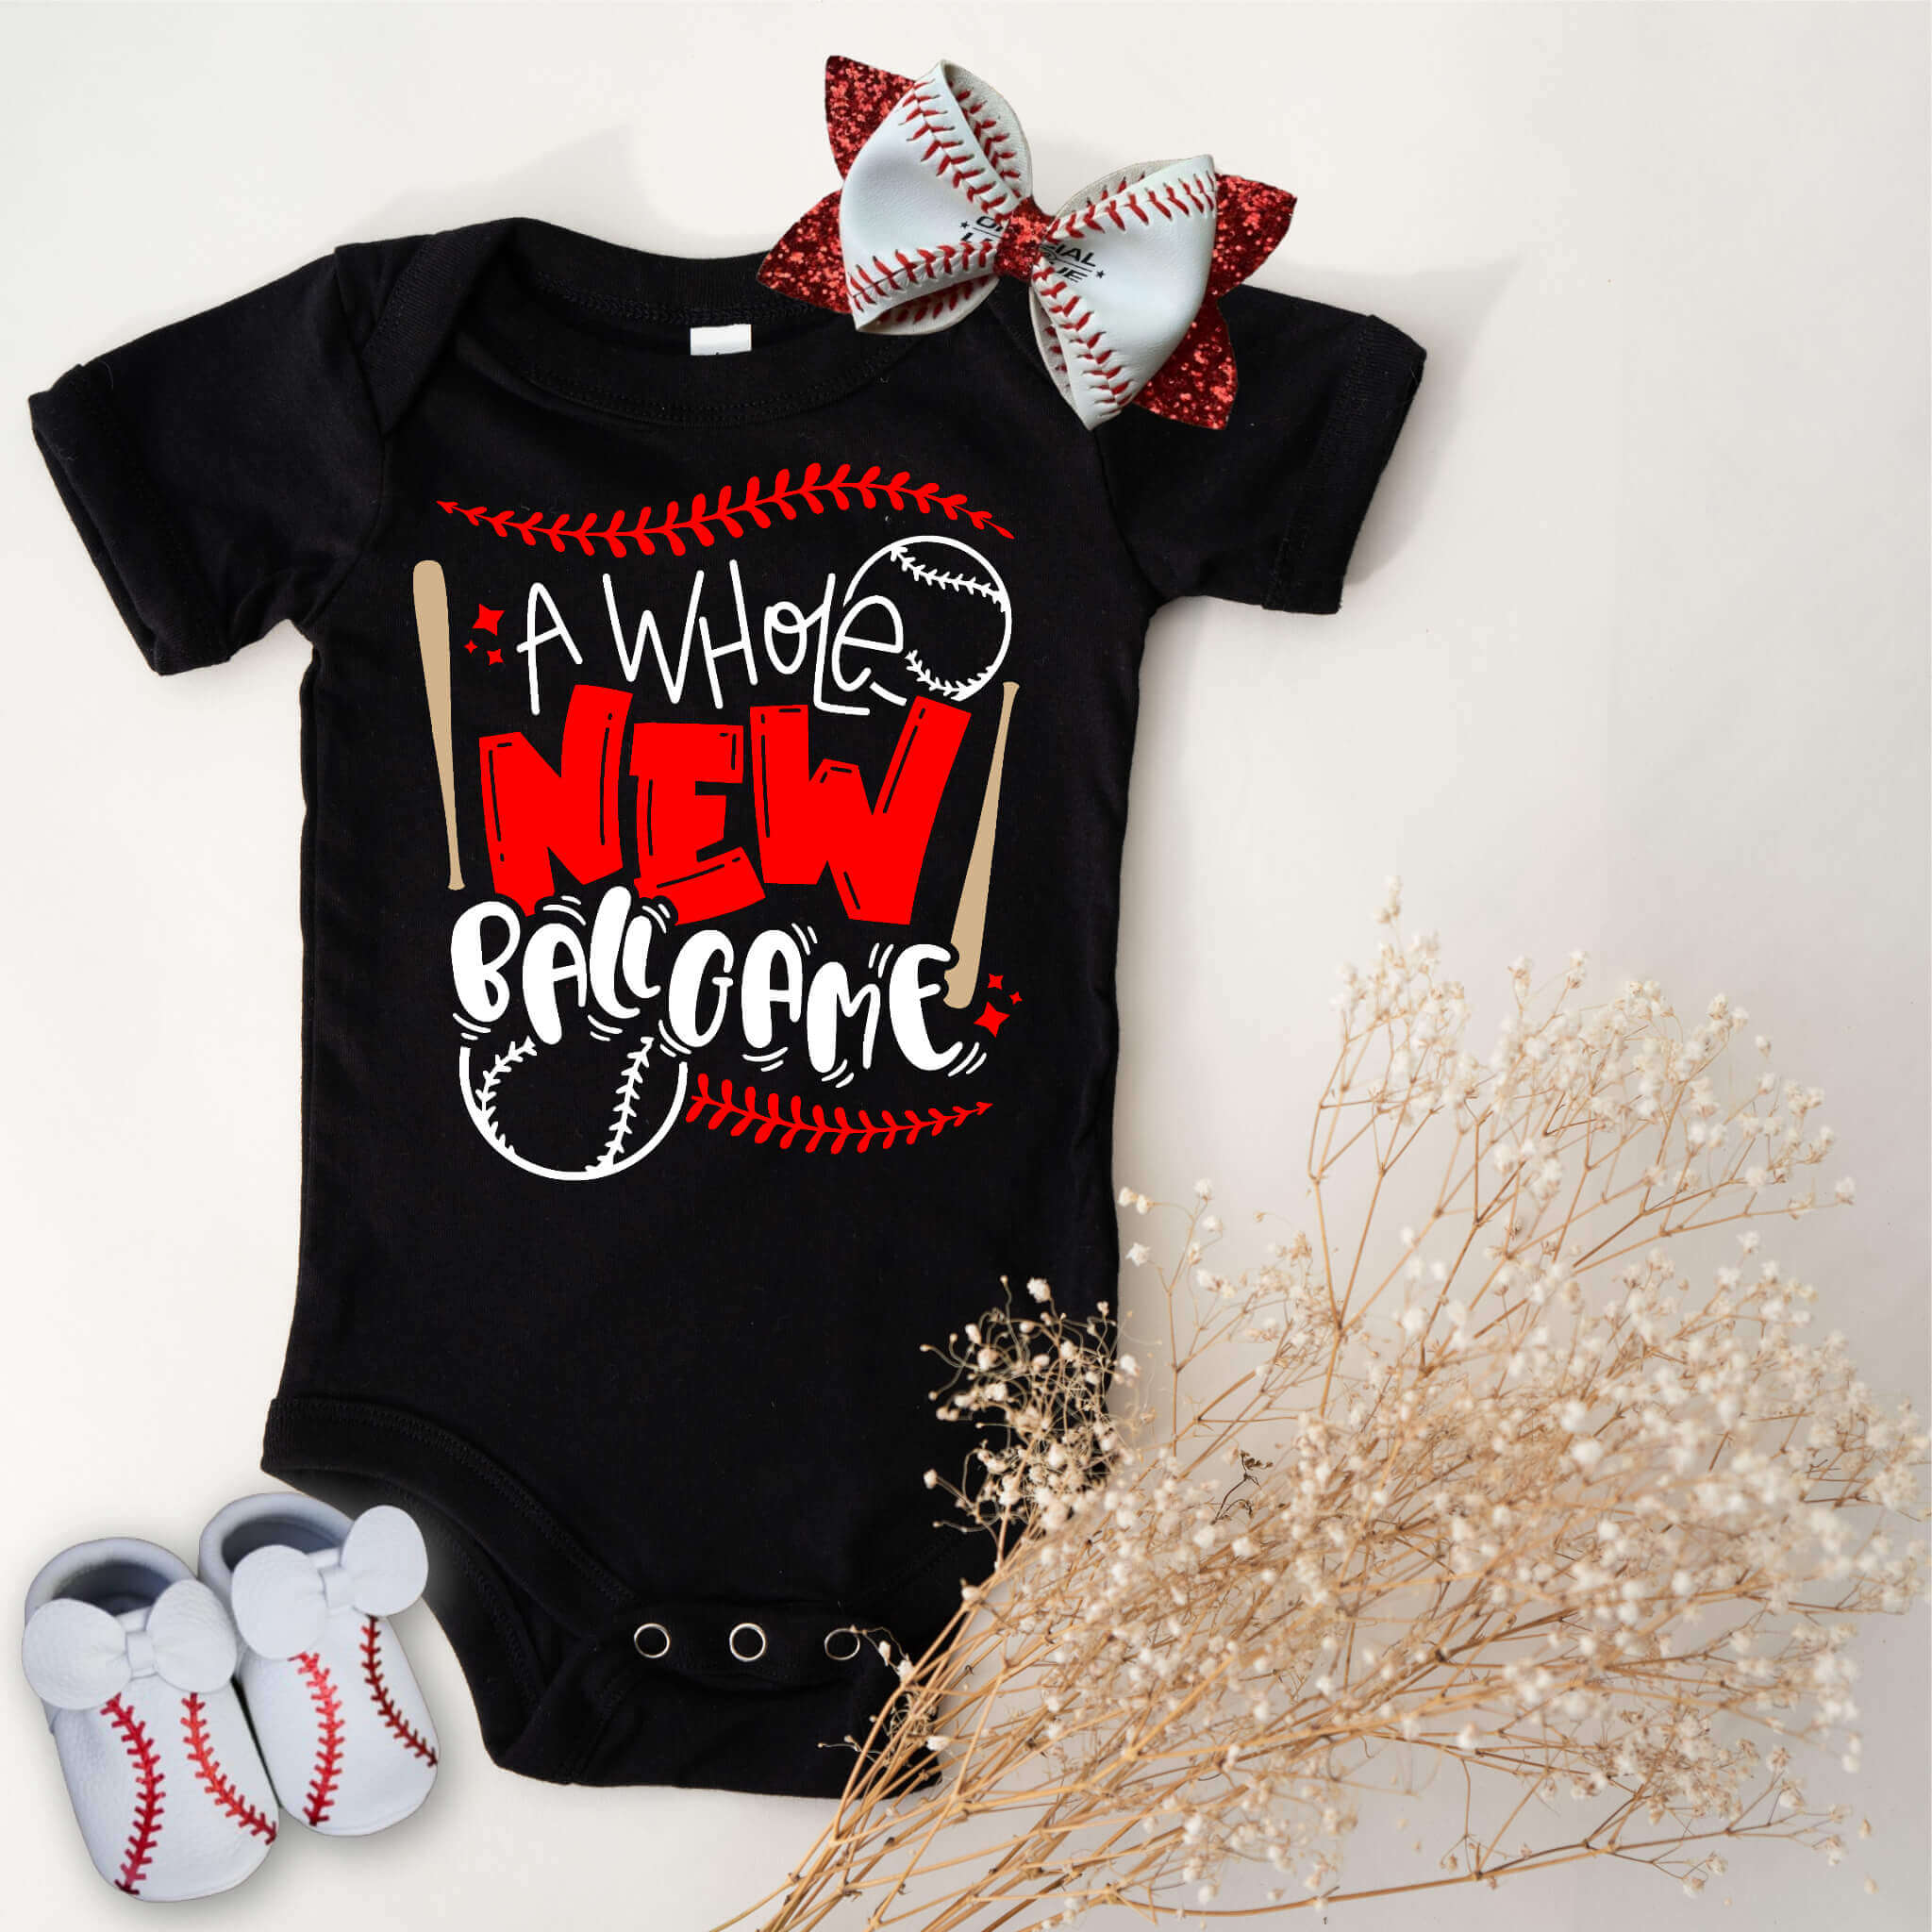 Baby Girl Gift Baby Girl Clothes Baby Girl Coming Home Outfit Baby Girl  Personalized Gift Newborn Girl Clothes Baby Shower Gift 